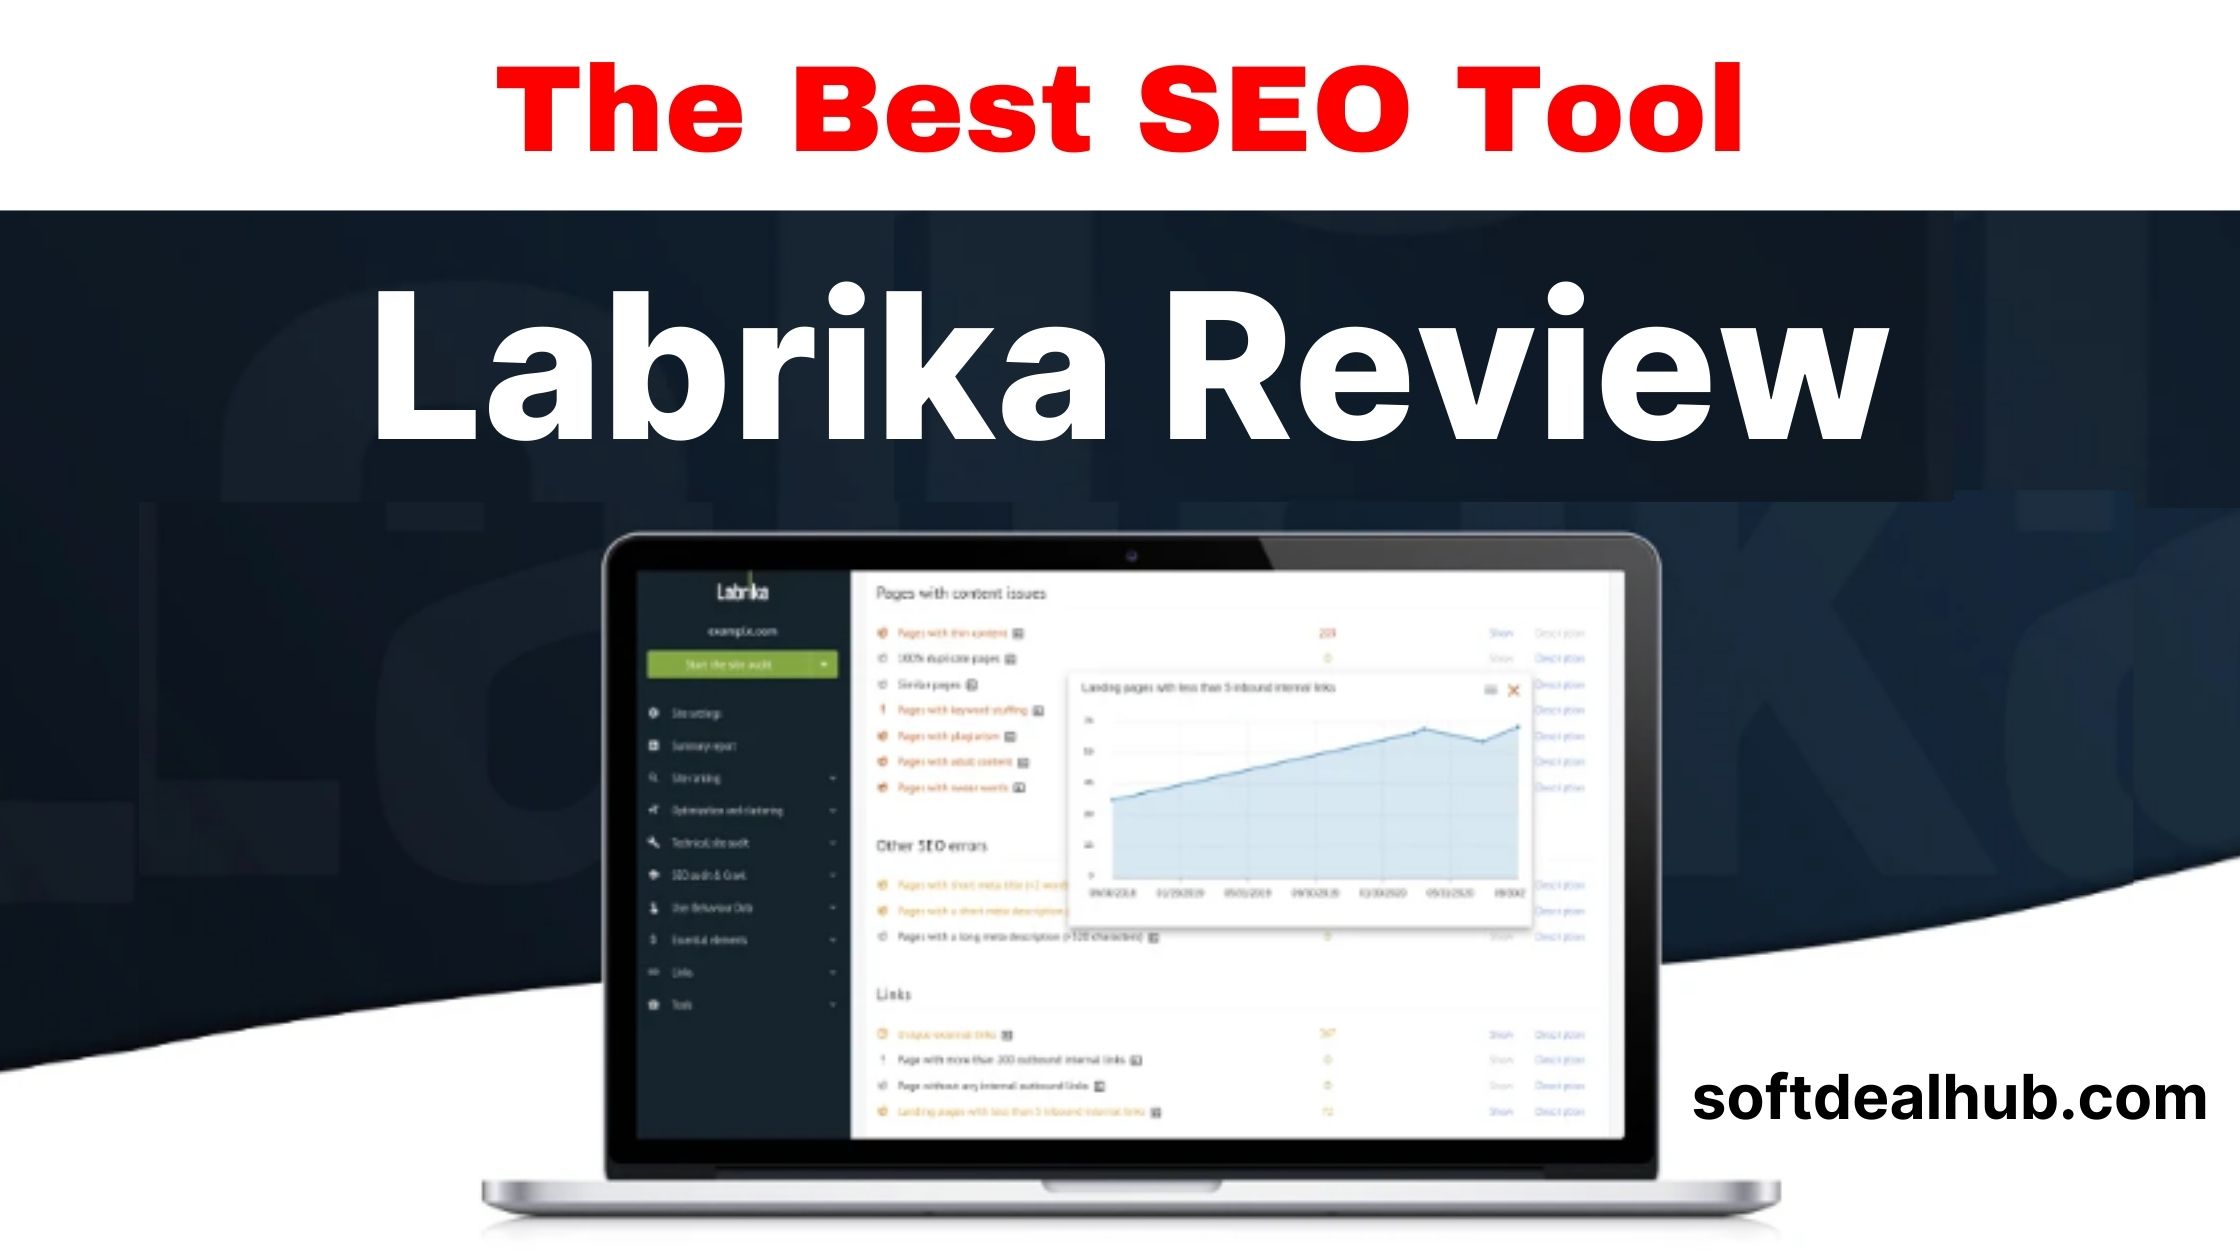 Labrika Review